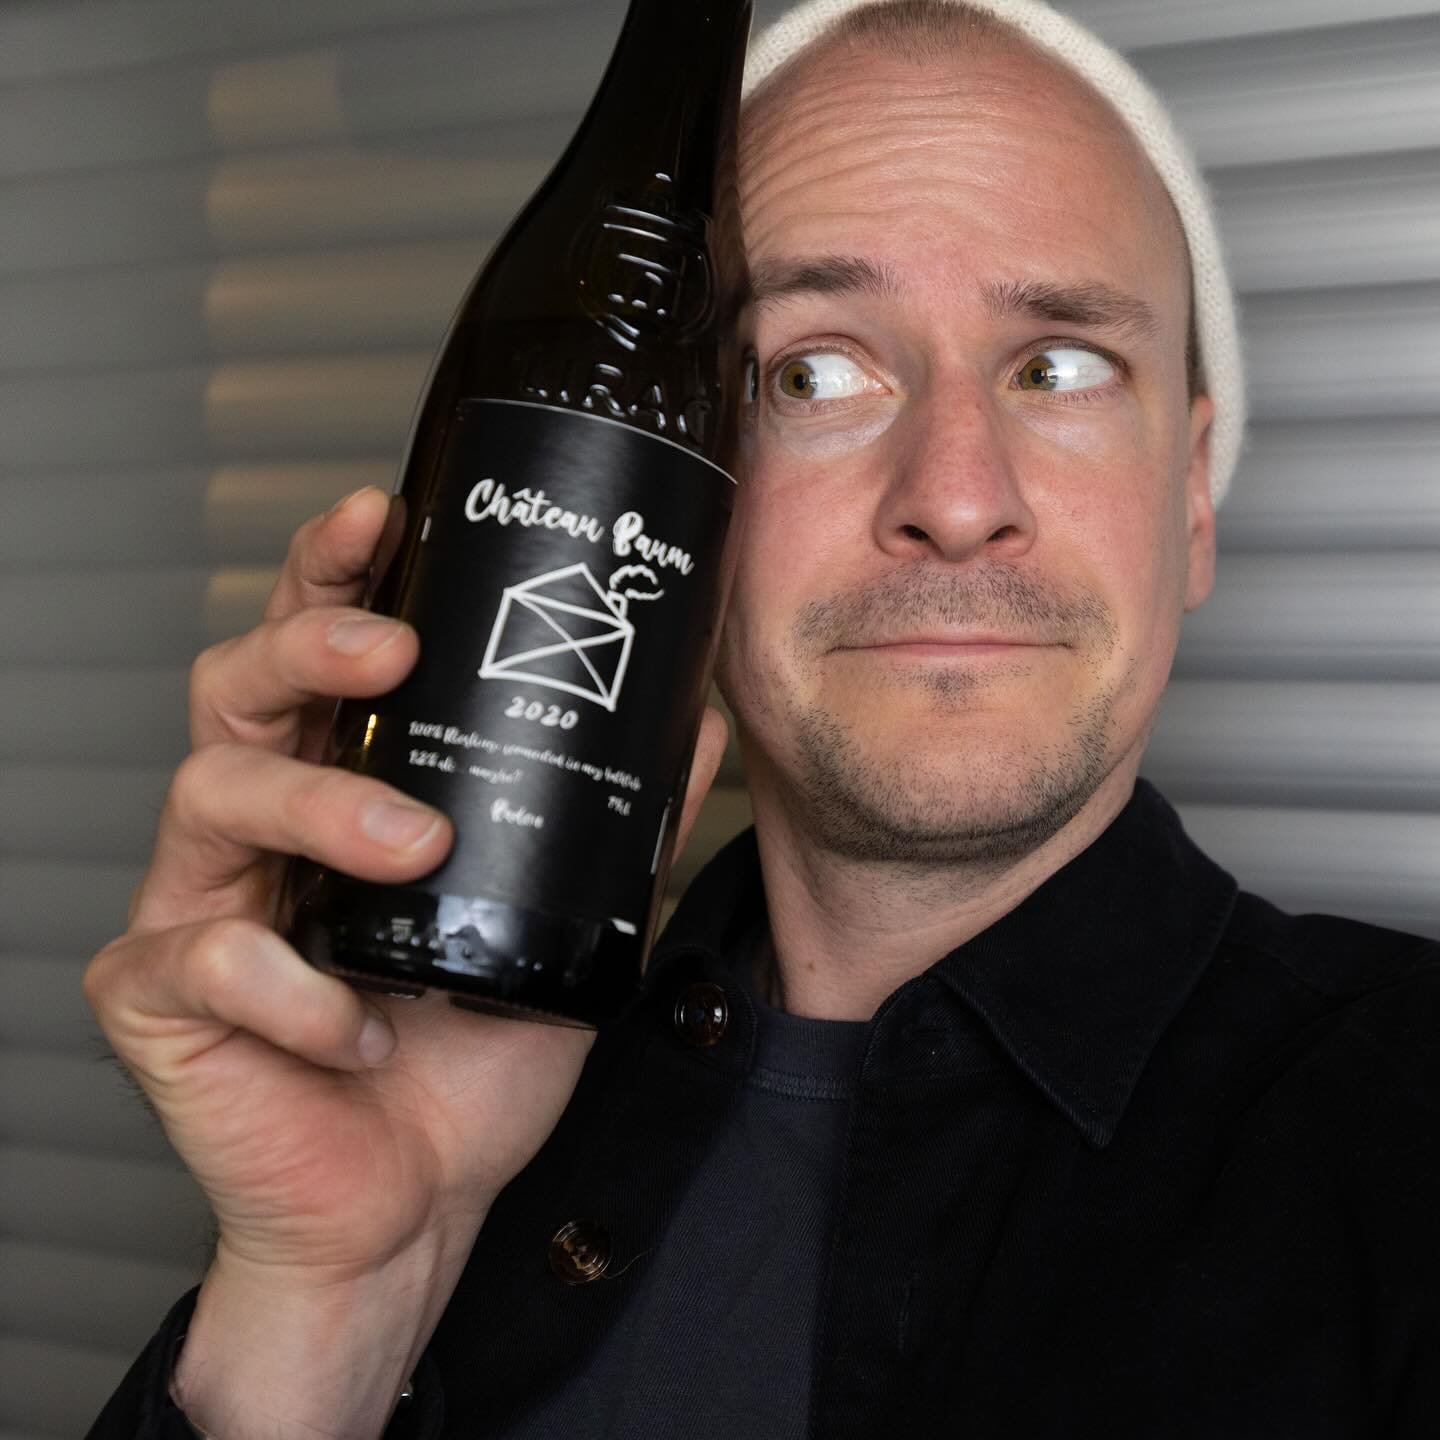 Tasting one of the rarest wines in the world .. 3.5 years ago I decided to beat boredom during the Lockdowns (remember those days?!) to make a few bottles of wine in my cellar. The 2020 Ch&acirc;teau Baum Riesling is still going strong, which might h